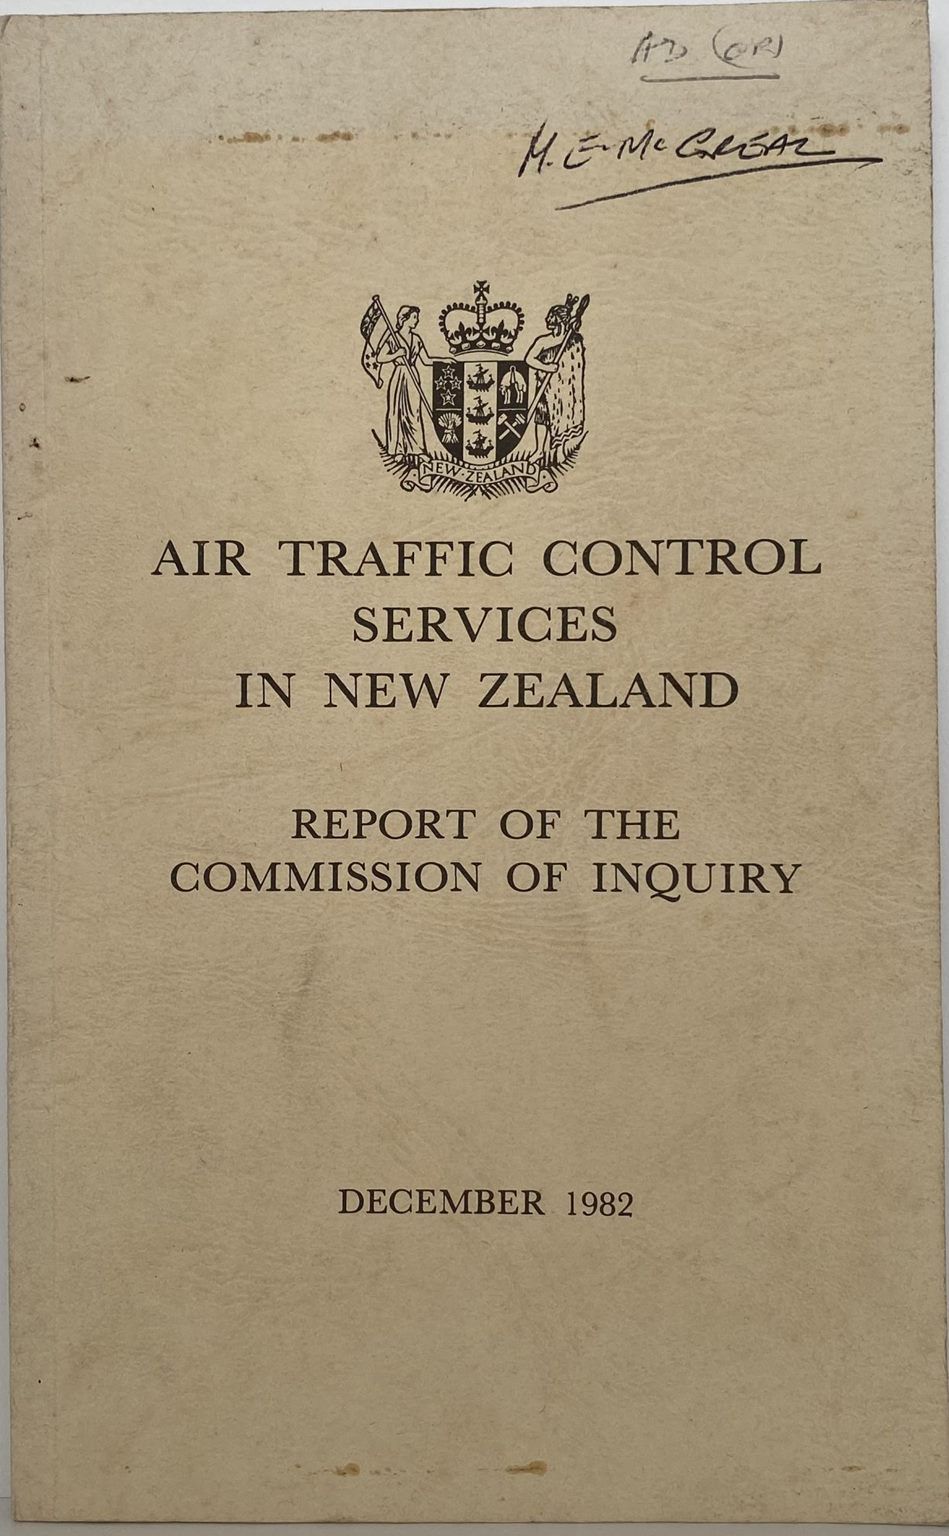 AIR TRAFFIC CONTOL SERVICES: Commission Inquiry Report 1982